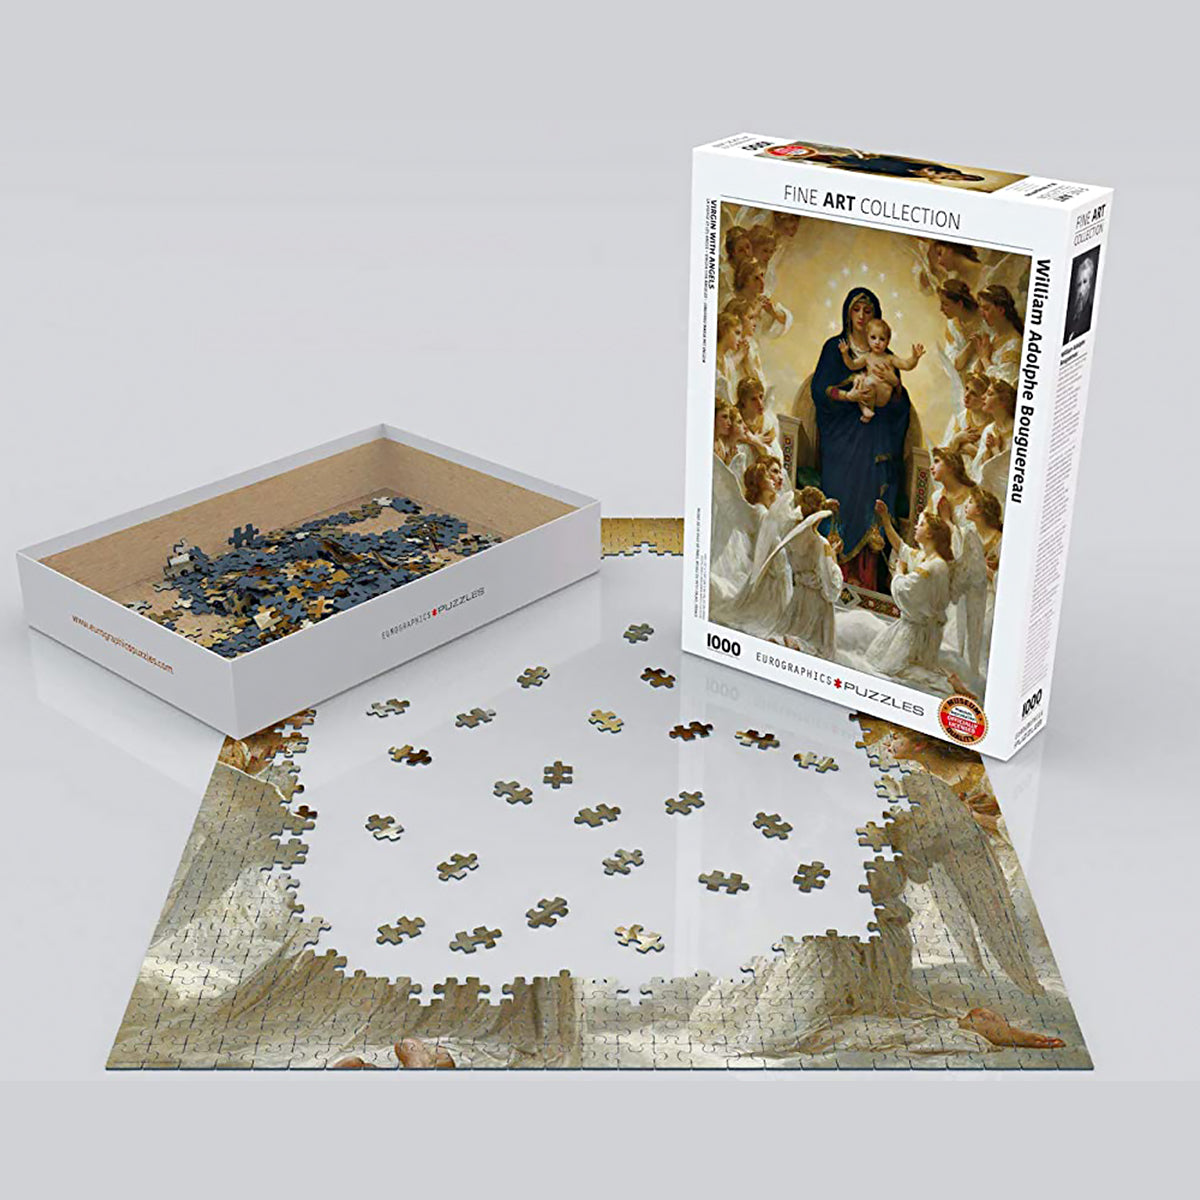 Immerse yourself in the intricate details of Bouguereau's masterpiece with this difficult puzzle from Eurographics